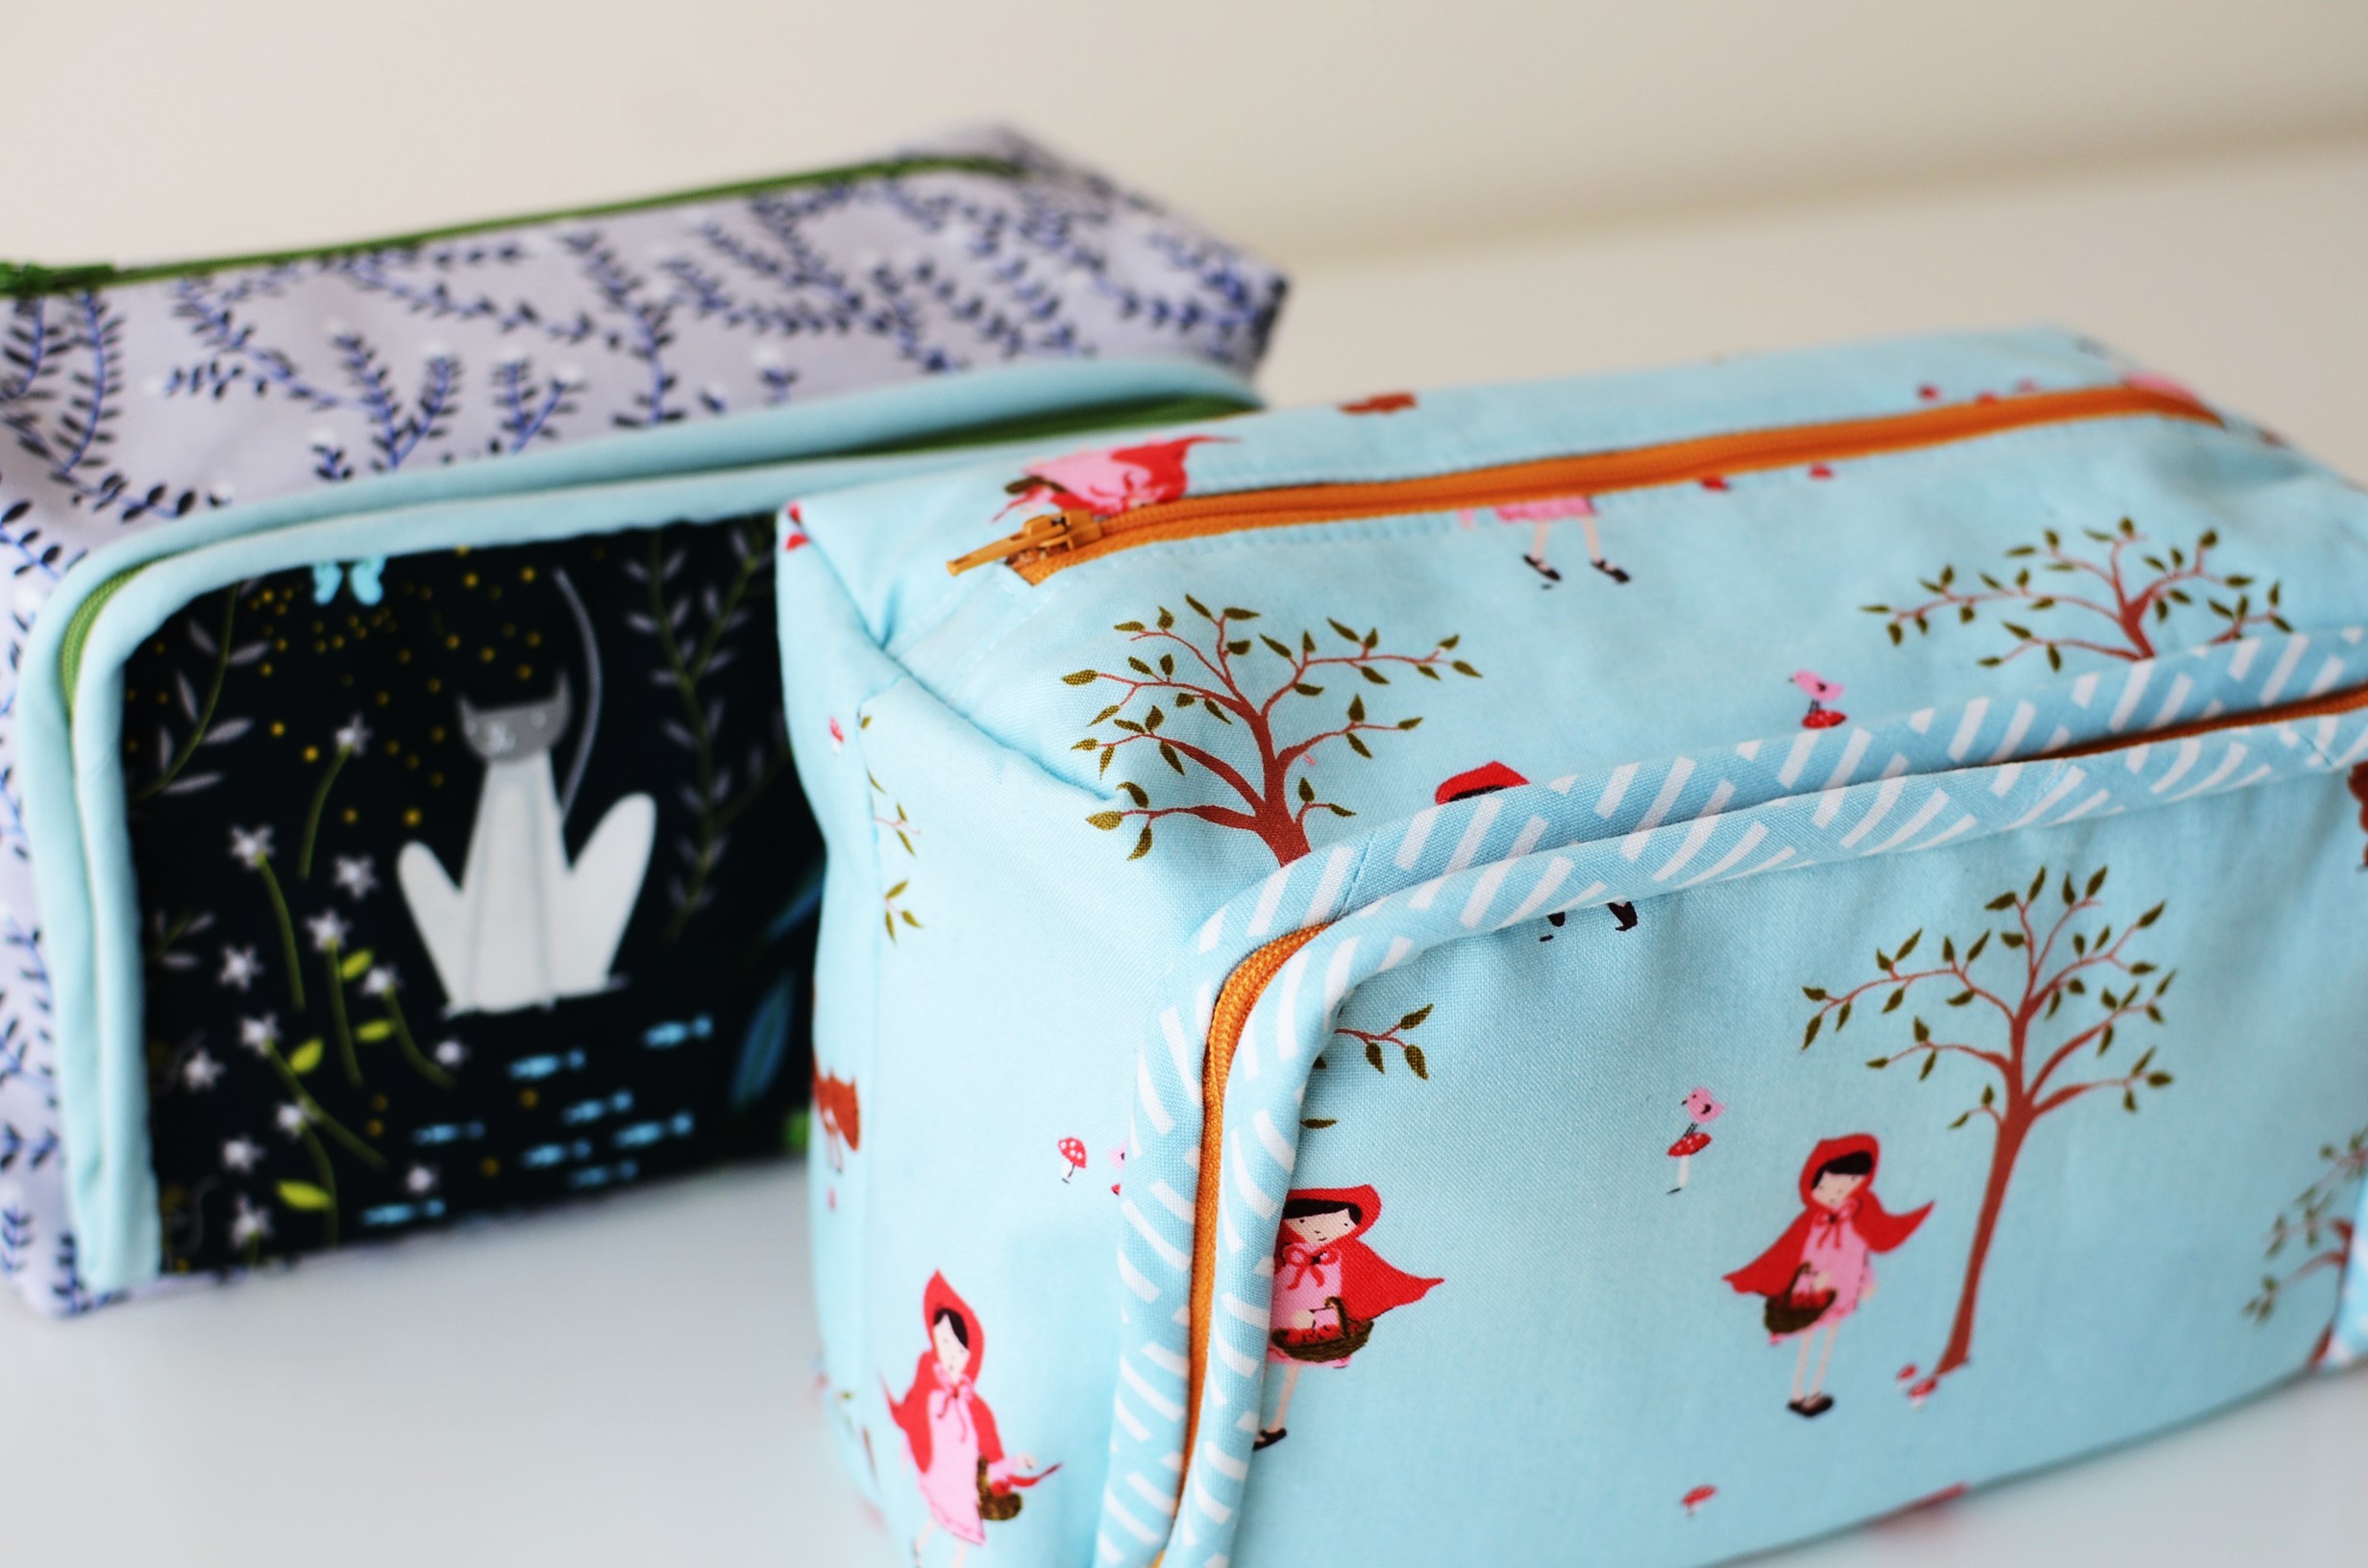 All In One Box Pouch Downloadable PDF Sewing Pattern, Aneela Hoey